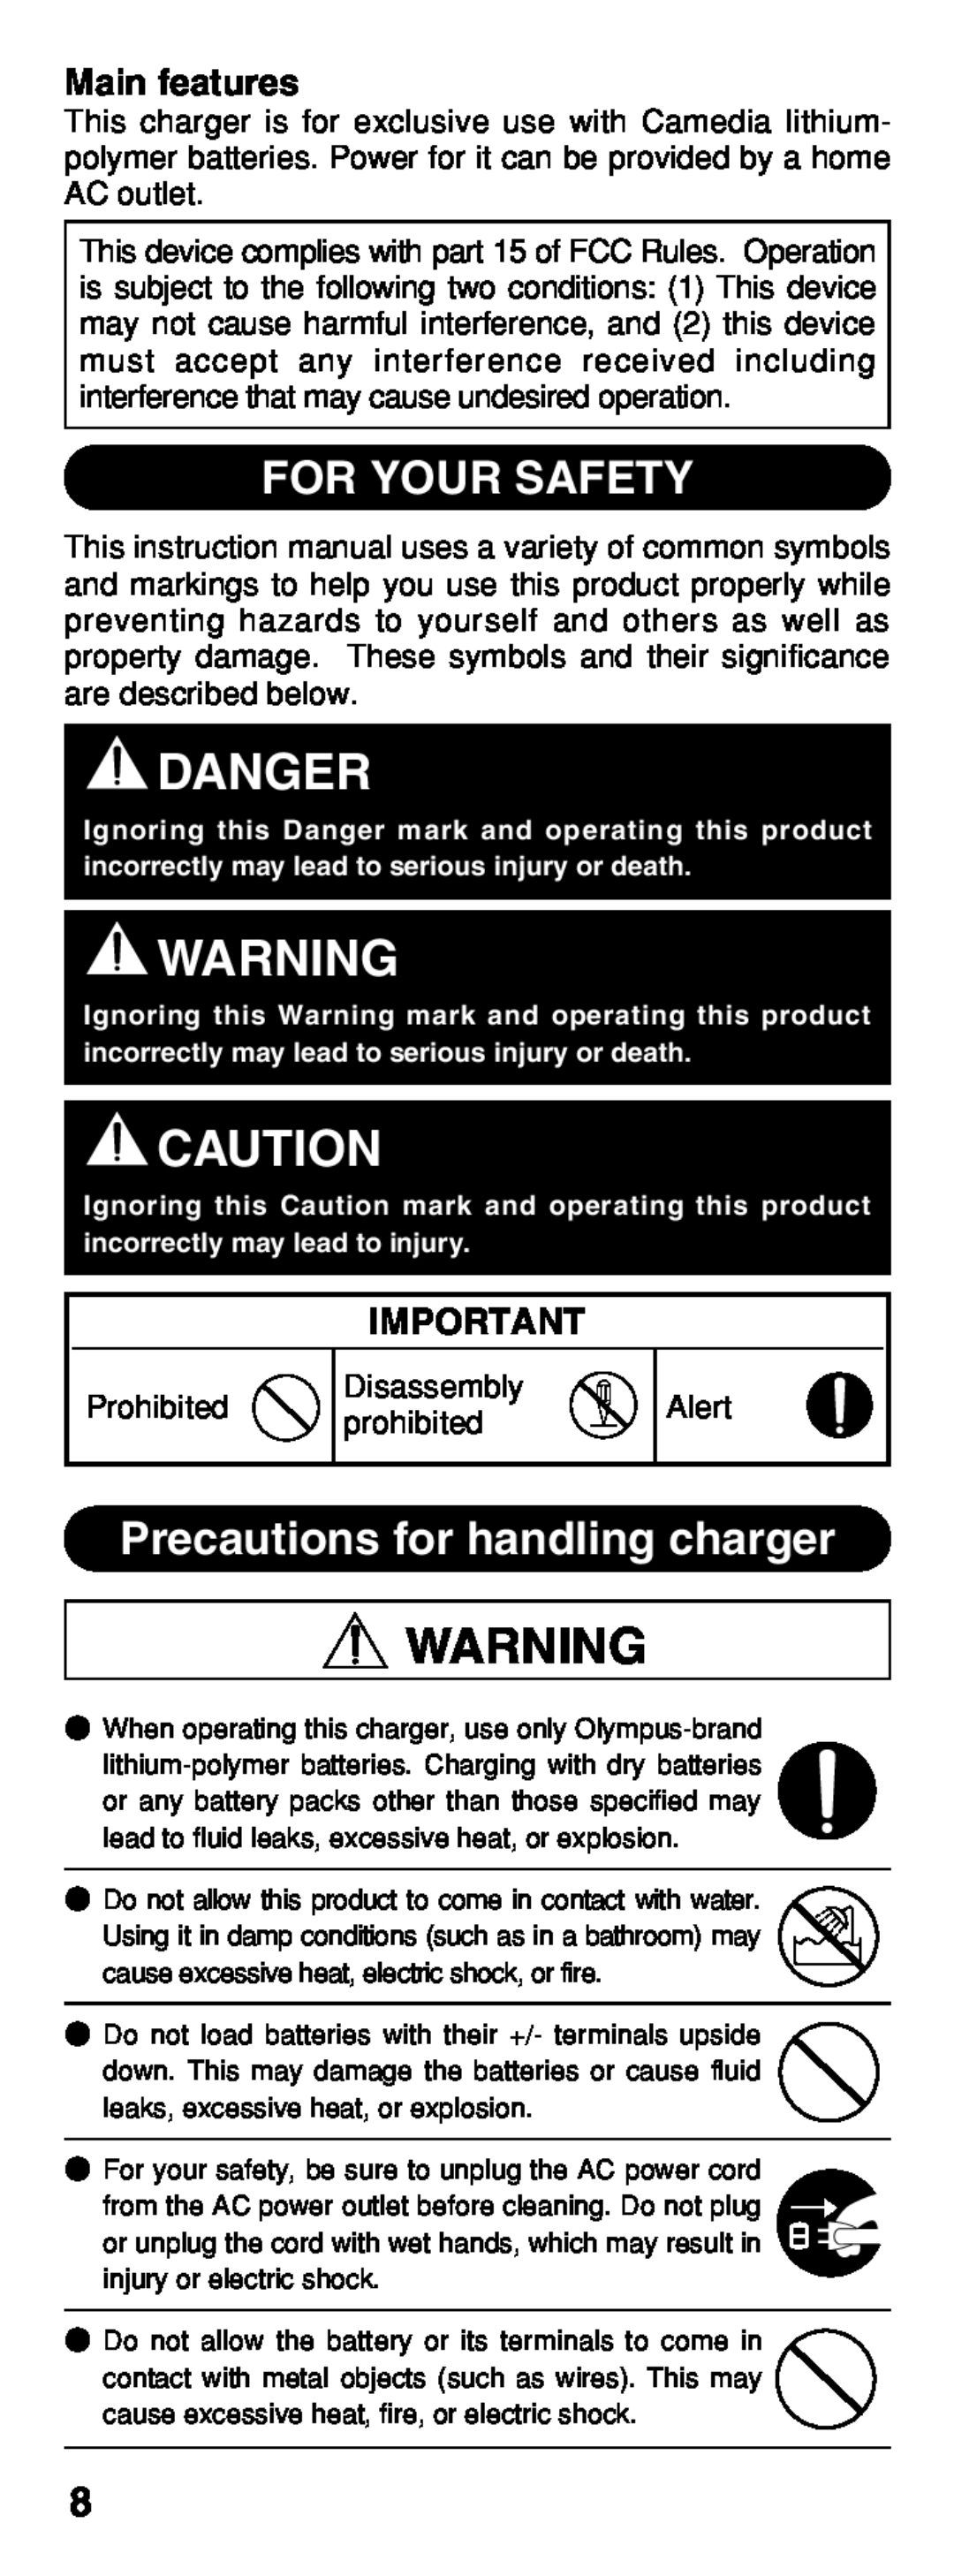 Olympus B-20 LPC instruction manual Danger, For Your Safety, Precautions for handling charger, Main features 